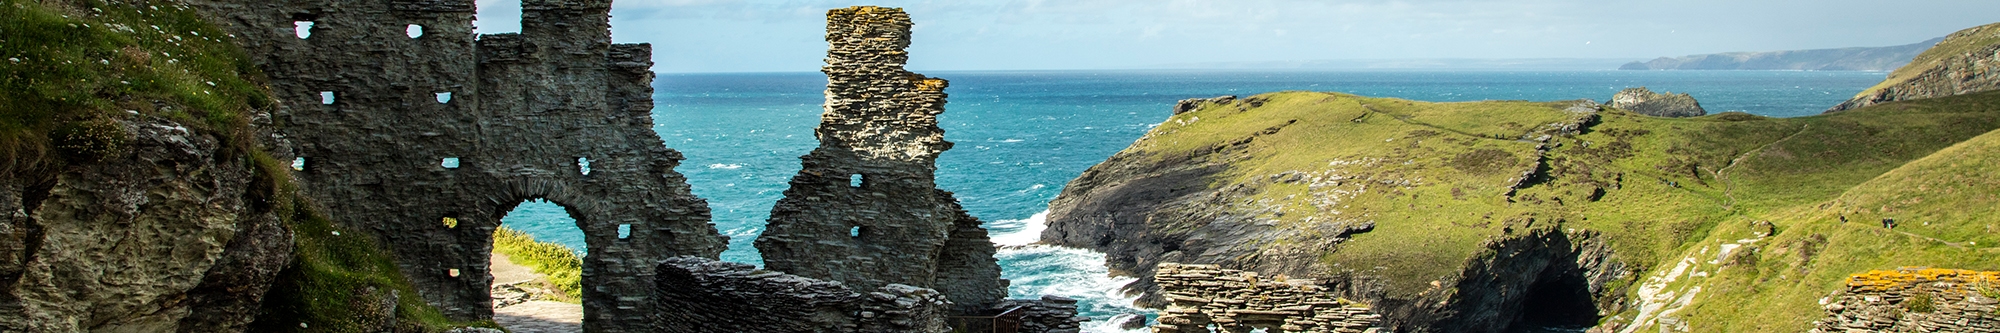 sea view over Tintagel Castle ruins